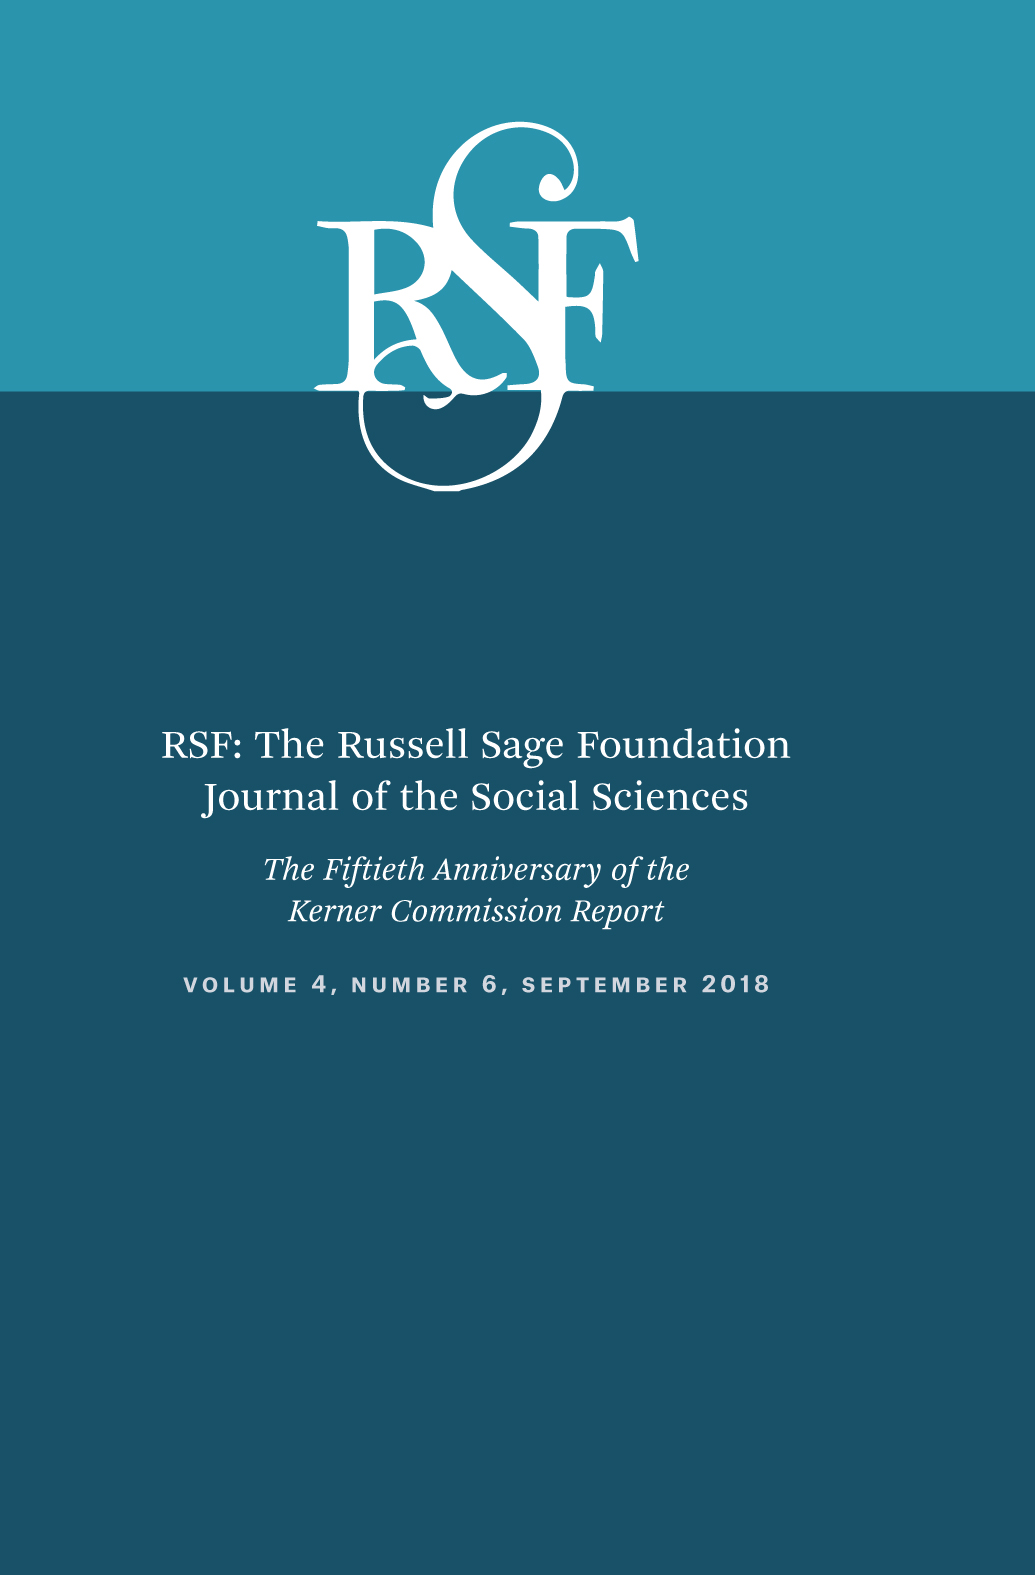 Detroit Fifty Years After the Kerner Report What Has Changed, What Has Not, and Why? RSF The Russell Sage Foundation Journal of the Social Sciences